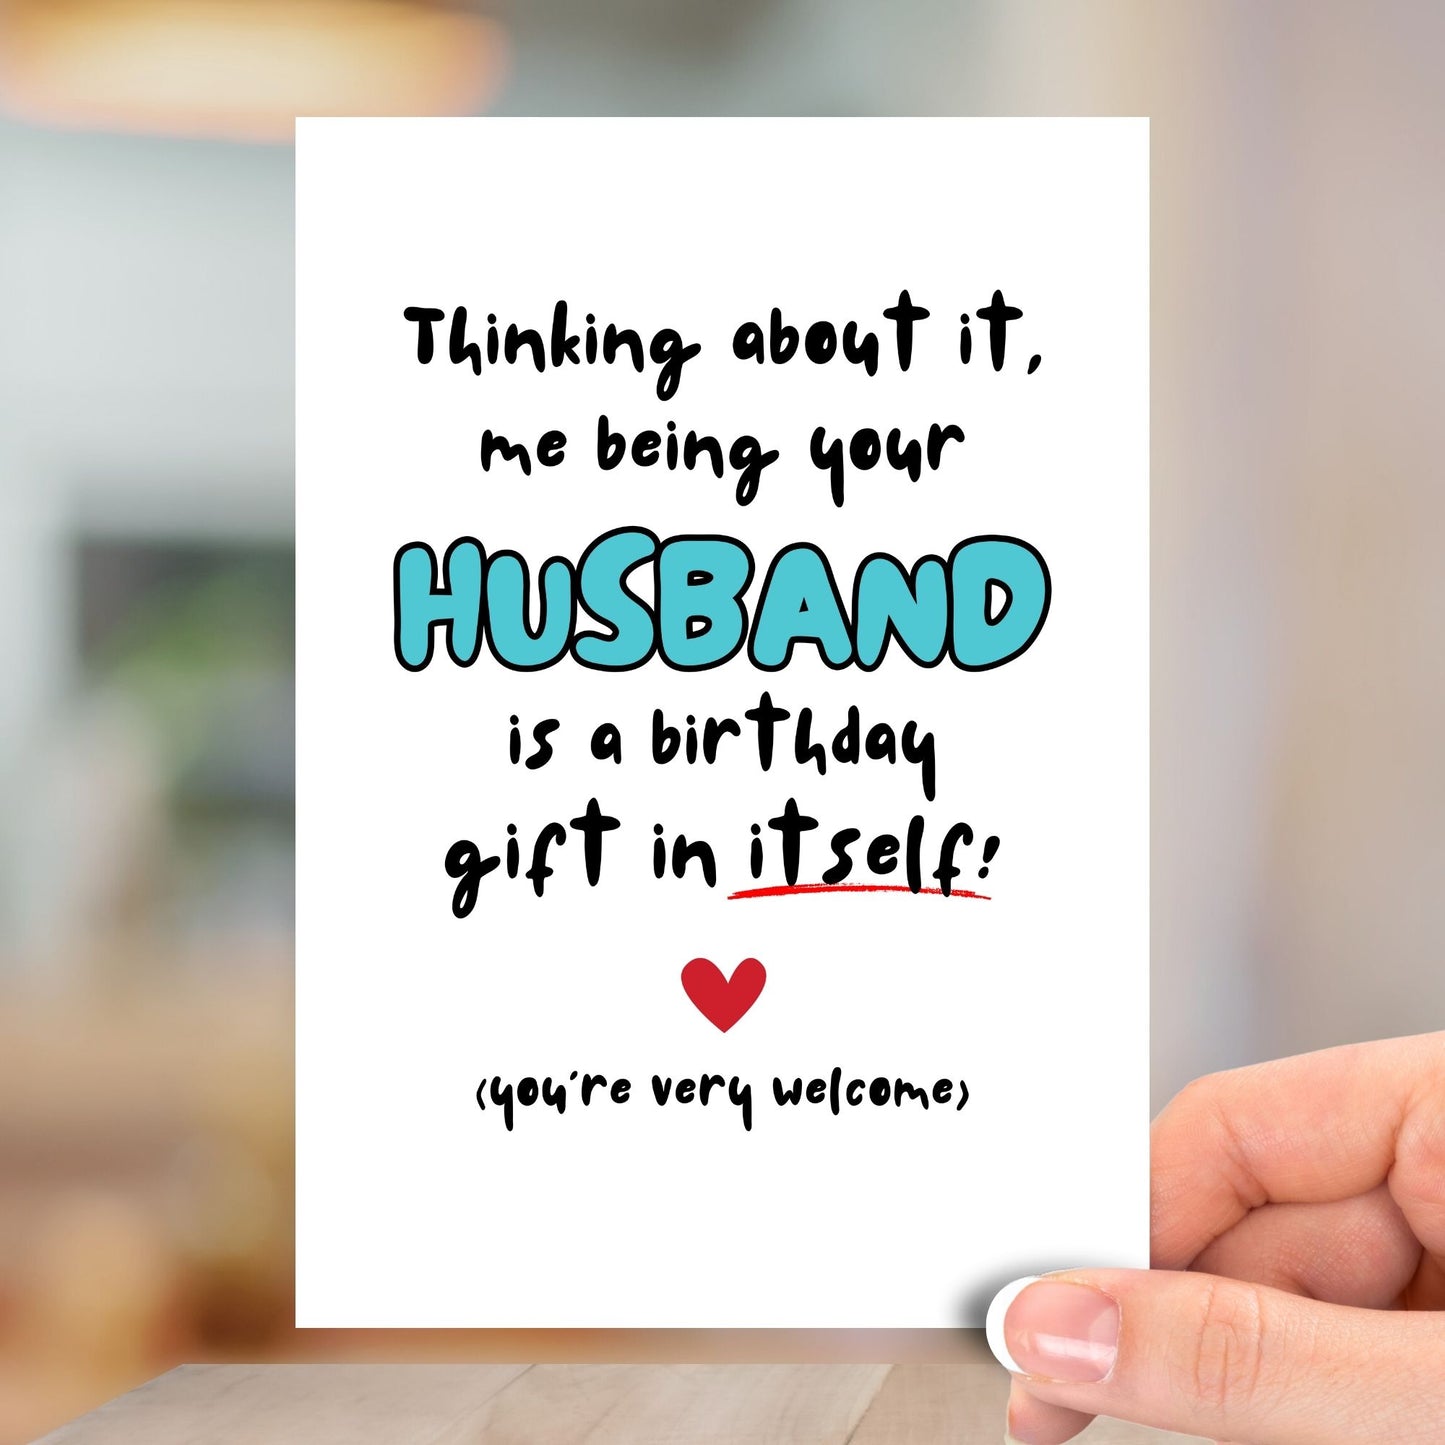 Thinking About It Me Being Your Husband, Happy Birthday Card